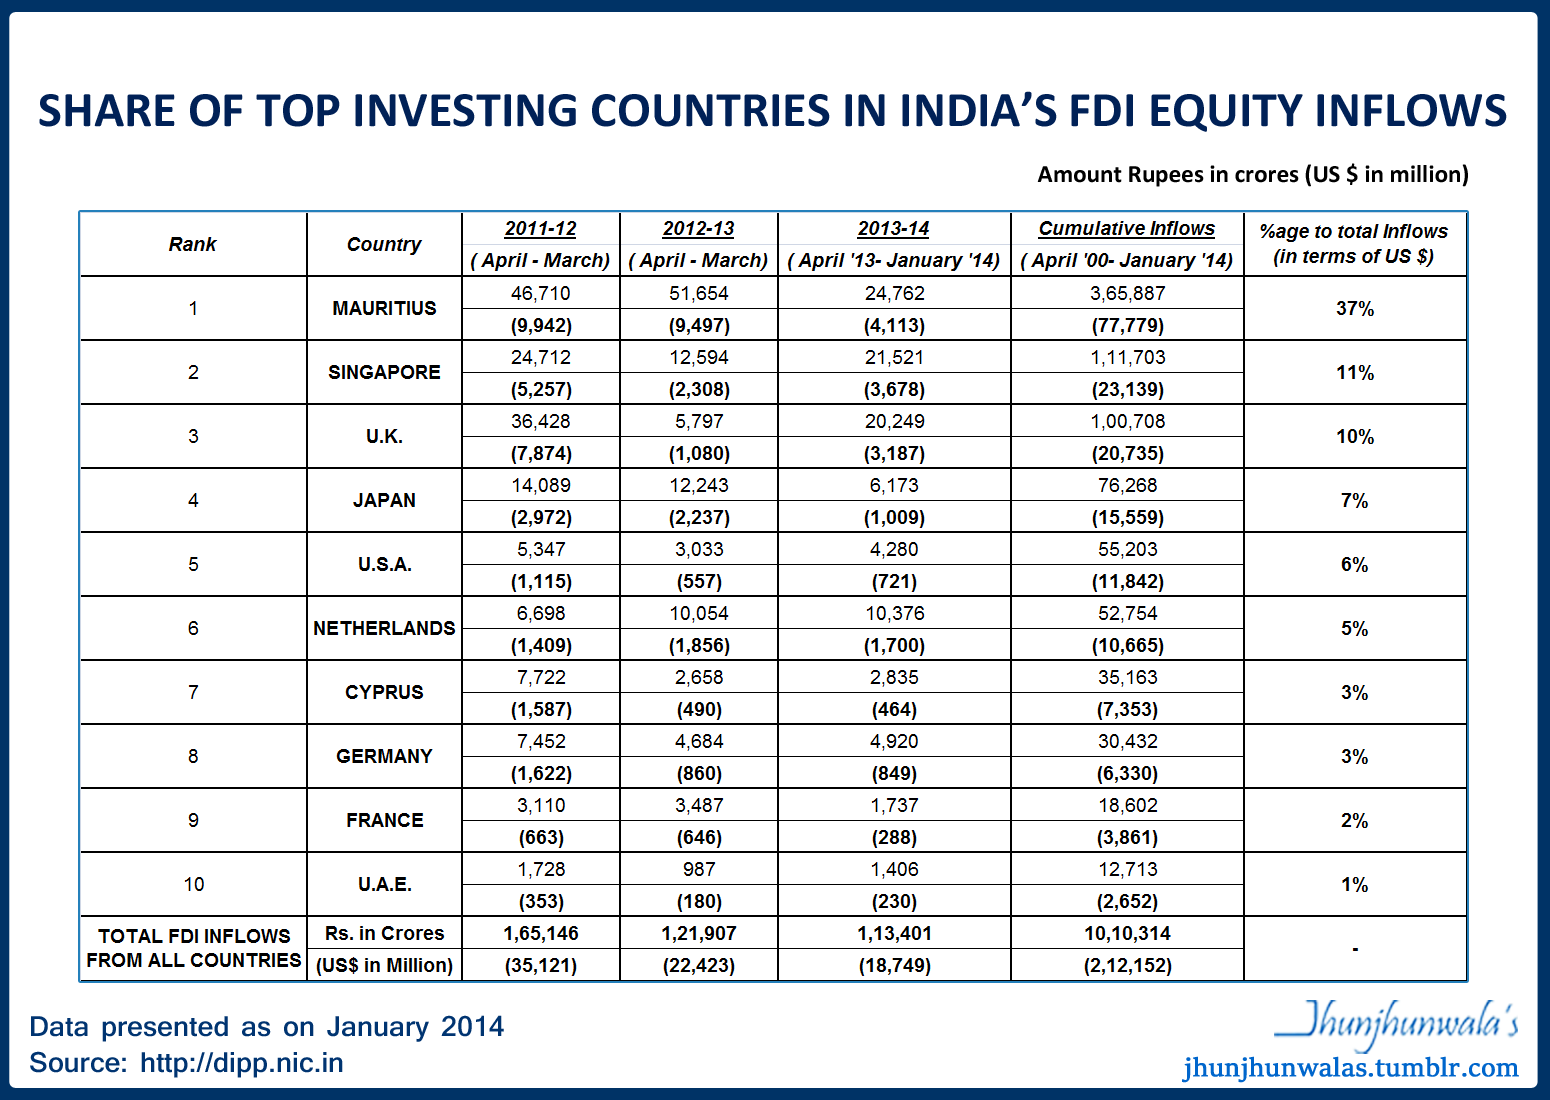 Share of Top 10 Investing Countries via Foreign Direct Investments (FDI) in India